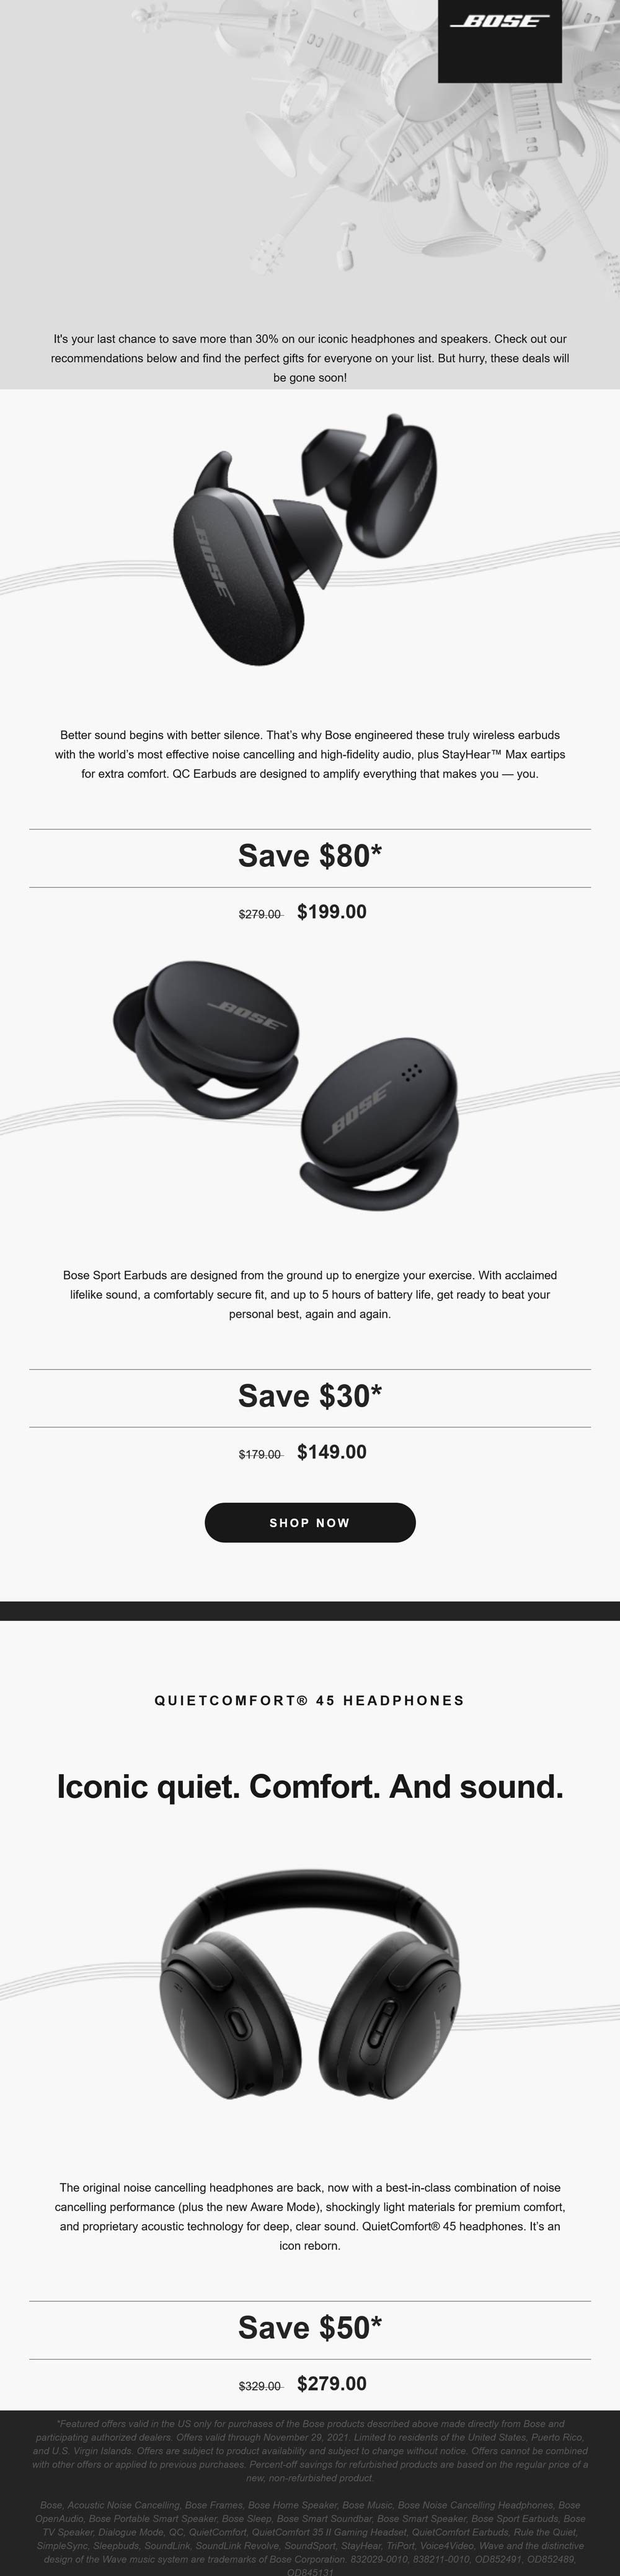 Bose coupons & promo code for [December 2022]